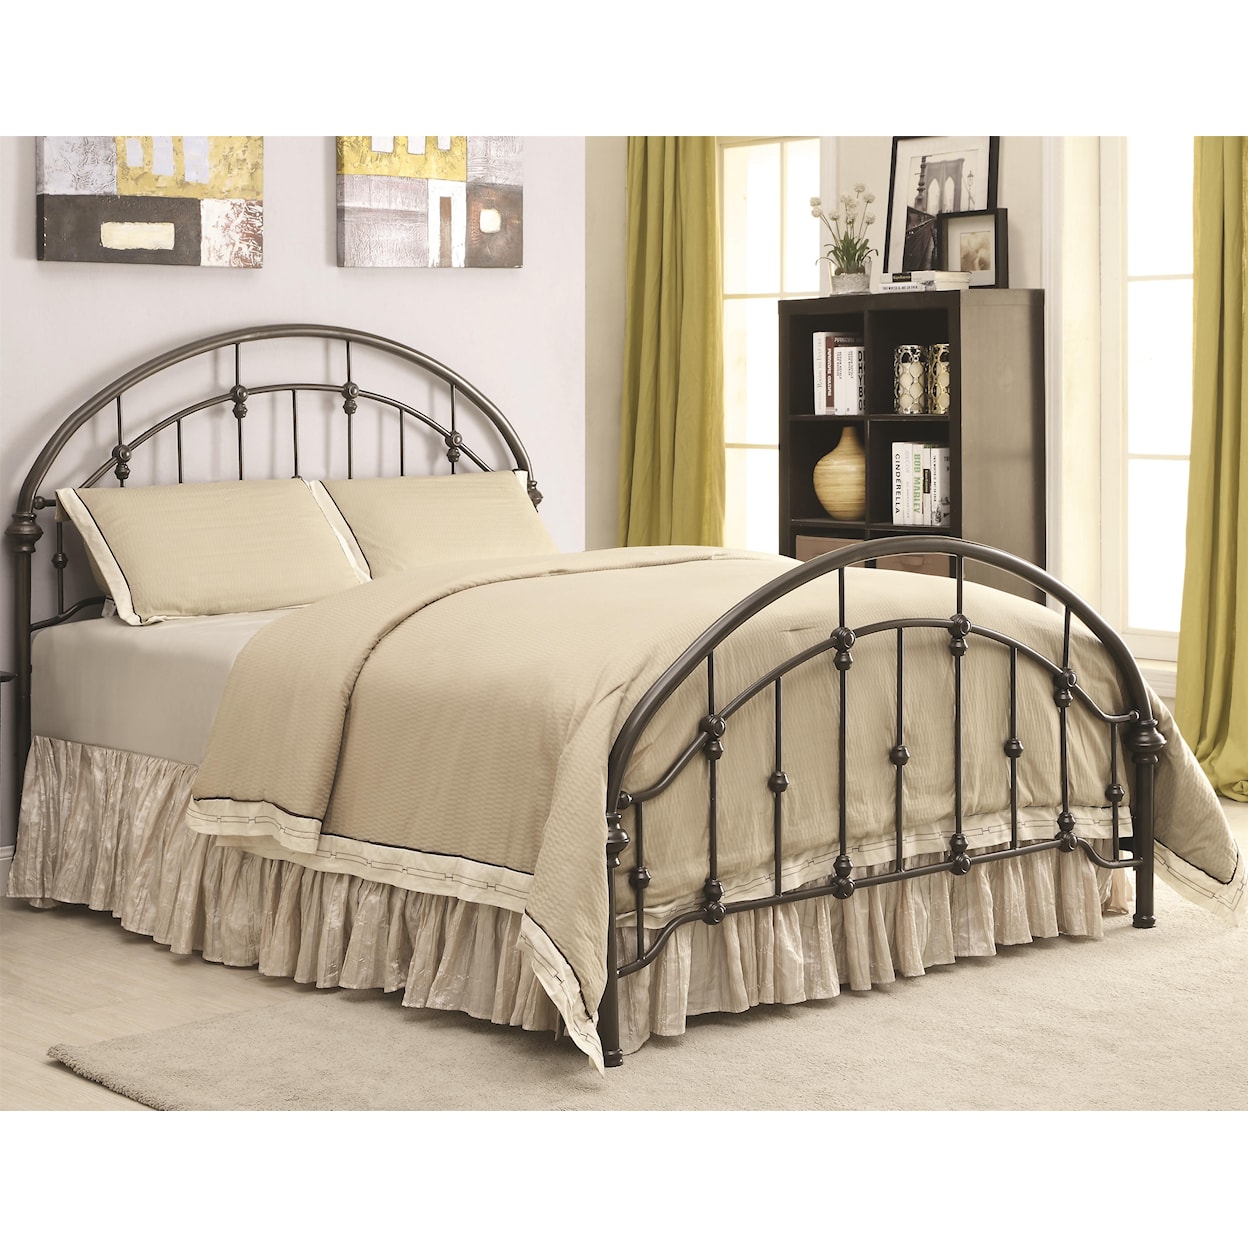 Coaster Iron Beds and Headboards King Bed